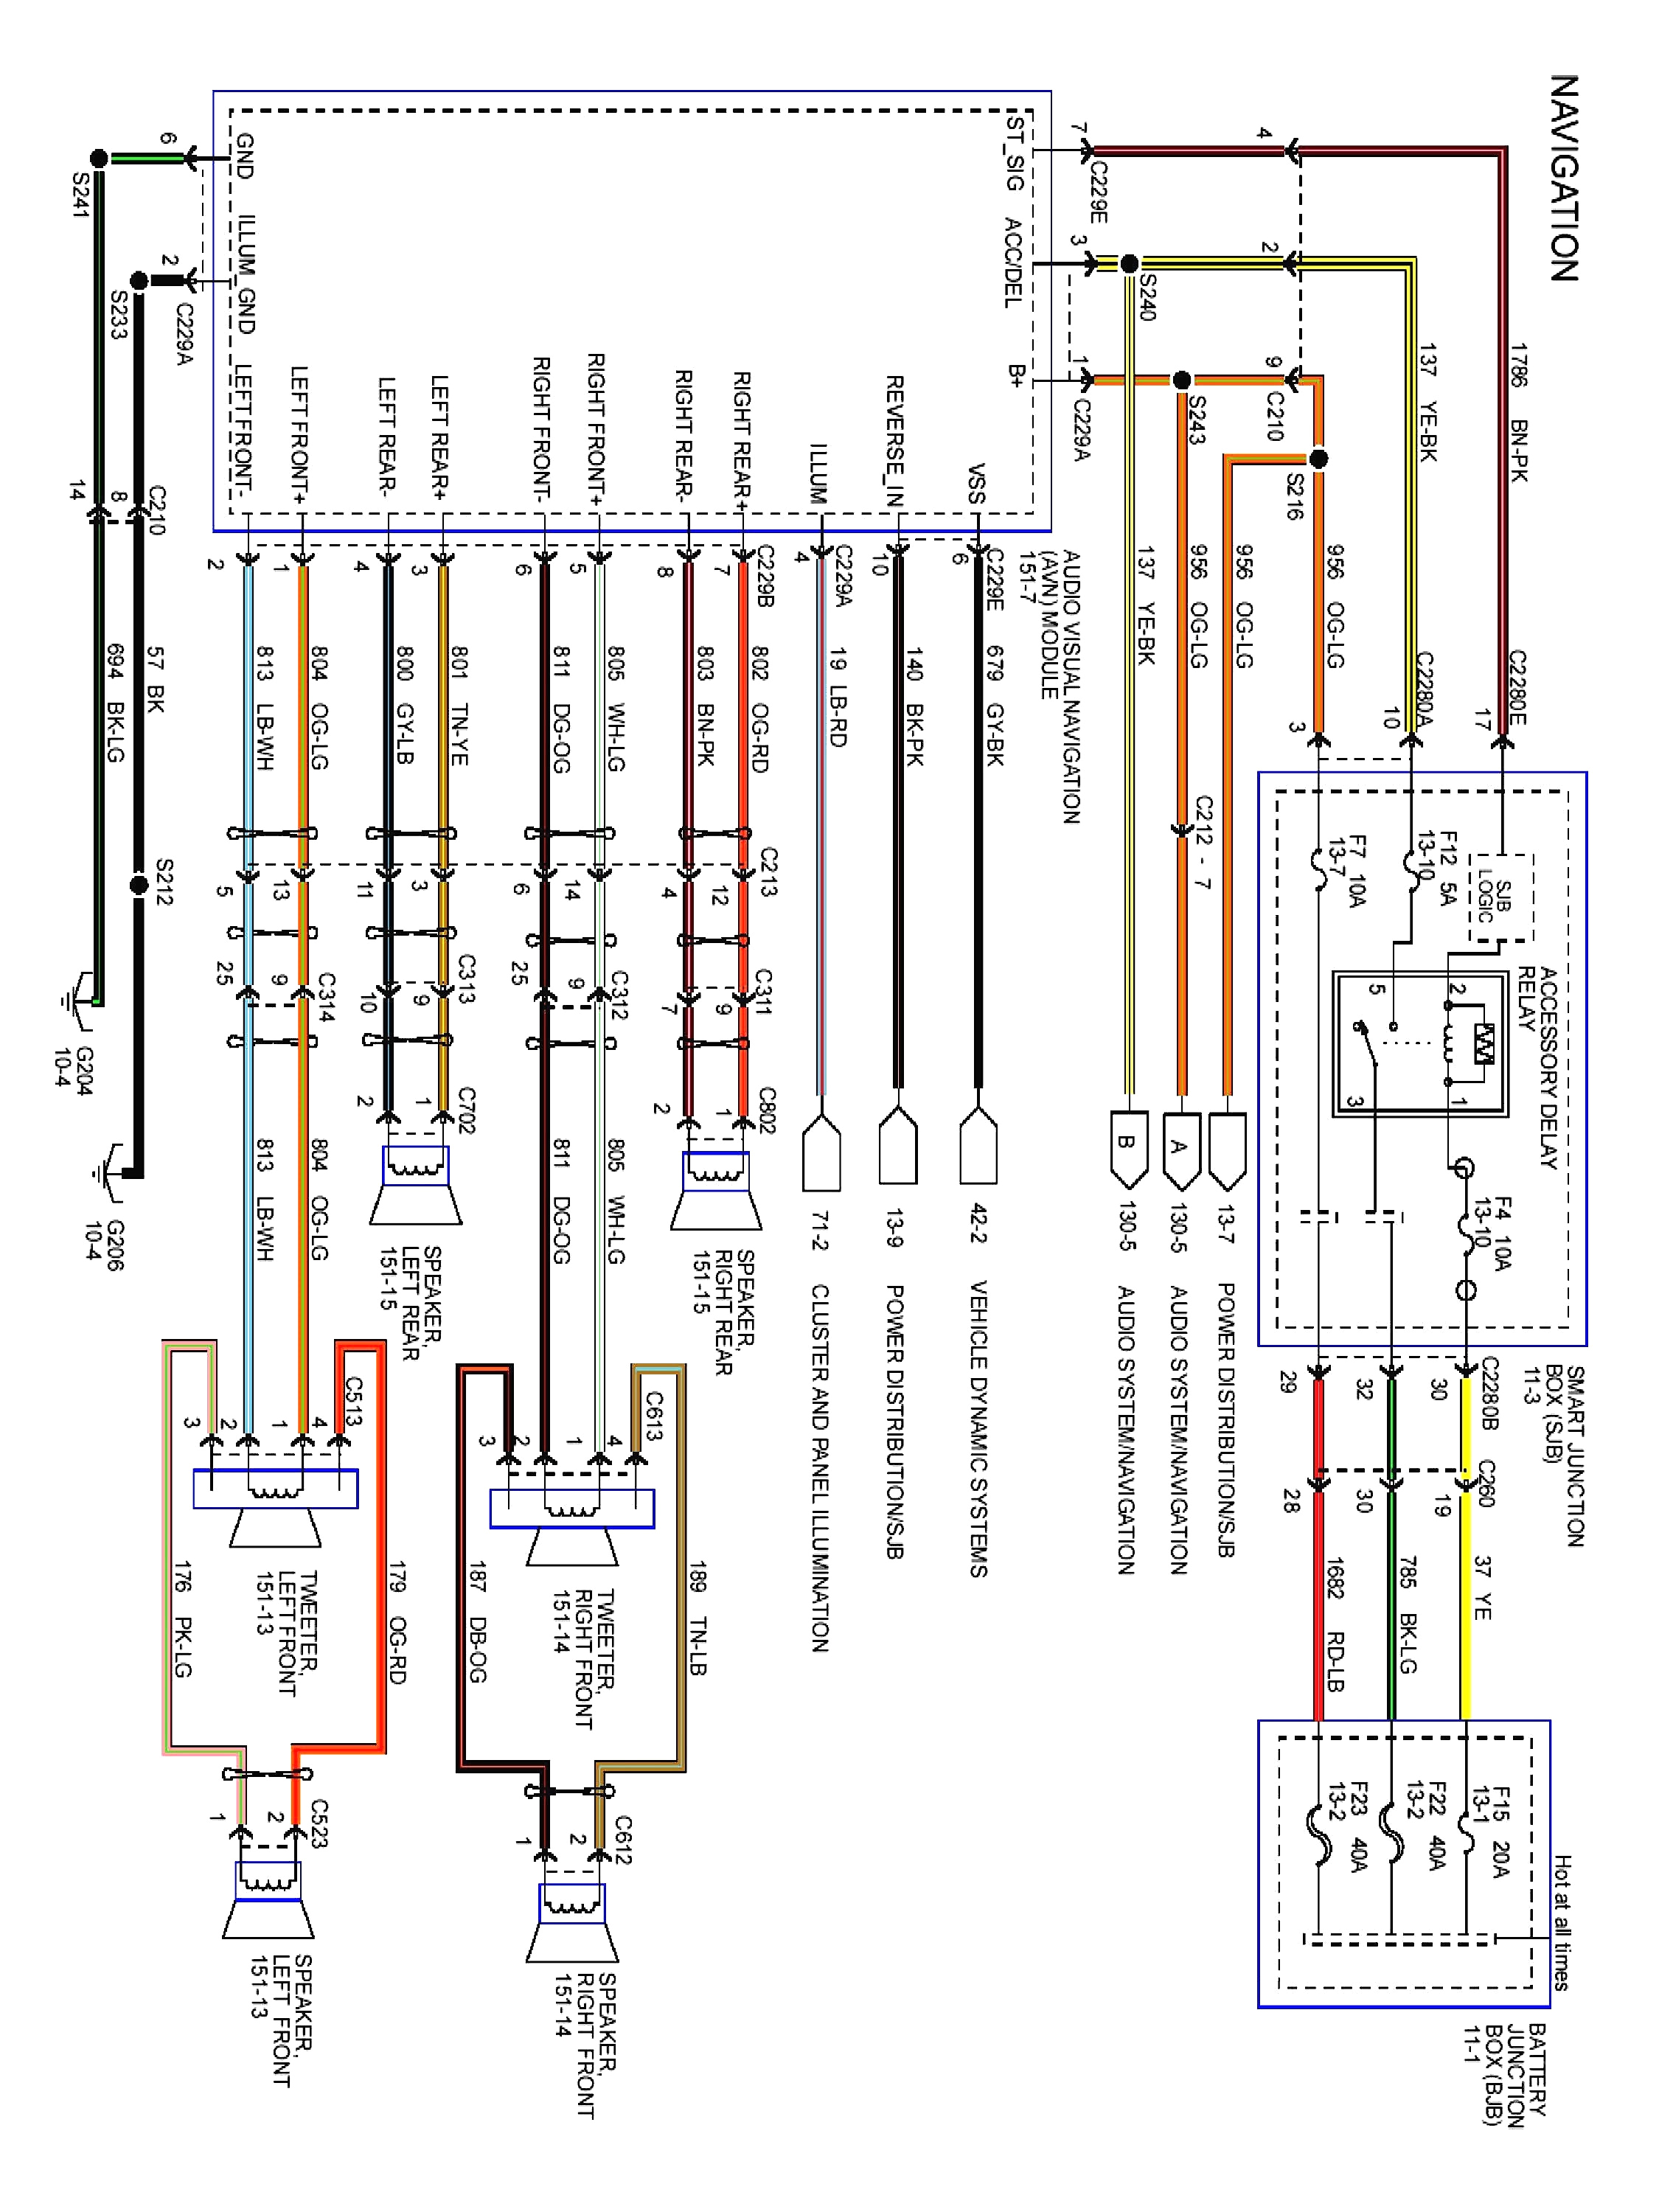 ford f 250 stereo wiring harness diagram wiring diagram technic 2011 ford ranger stereo wiring diagram 2011 f250 stereo wiring diagram